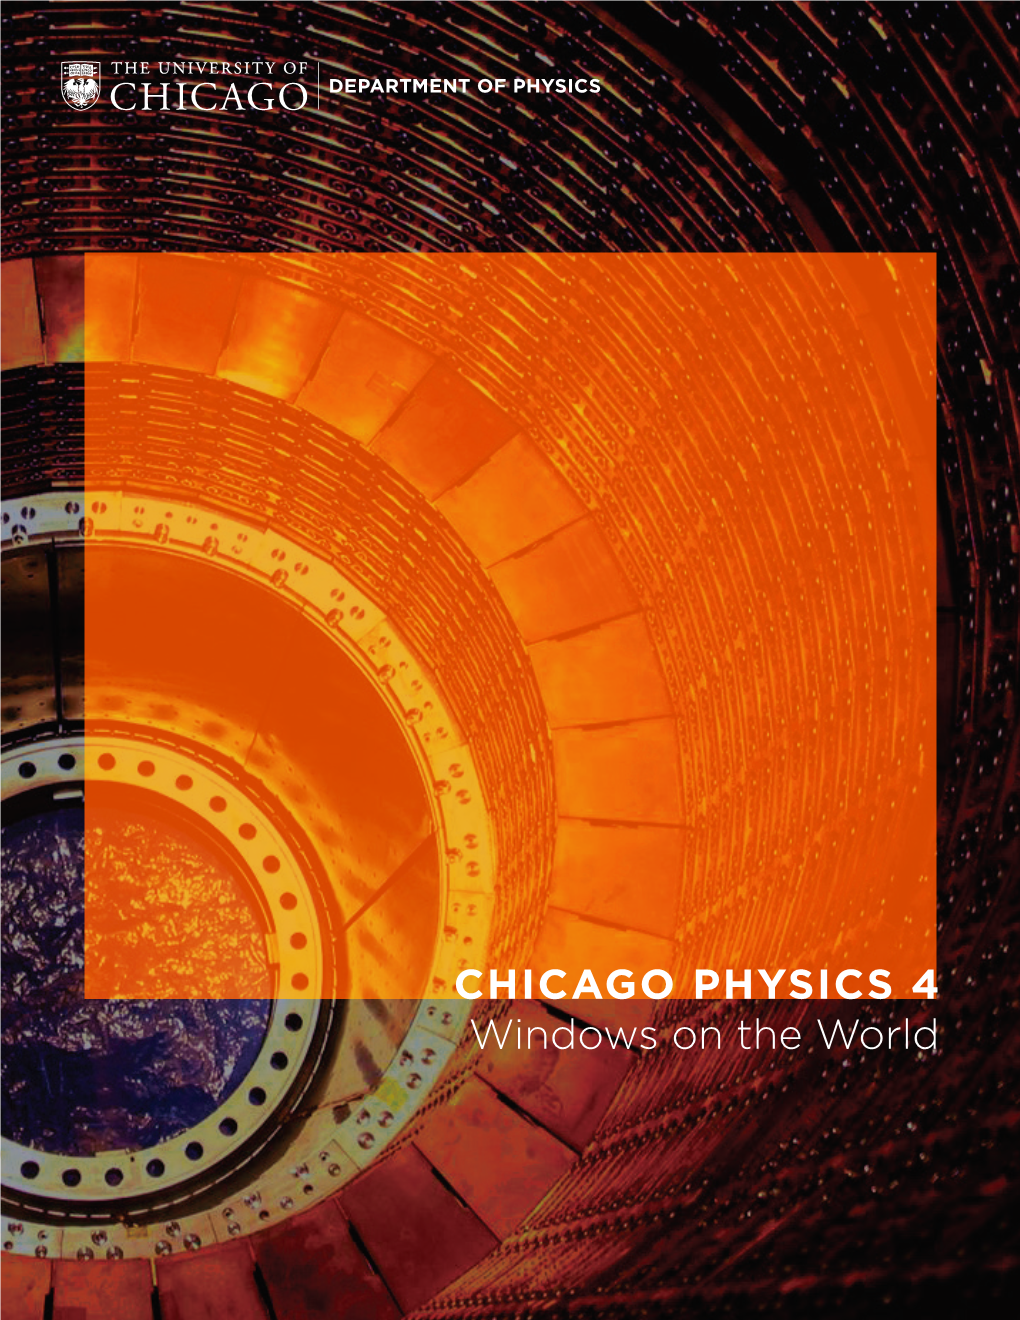 CHICAGO PHYSICS 4 Windows on the World Welcome to the Fourth Issue of Chicago Physics! in Our Last Issue, We Took You on a Journey to the Quantum World